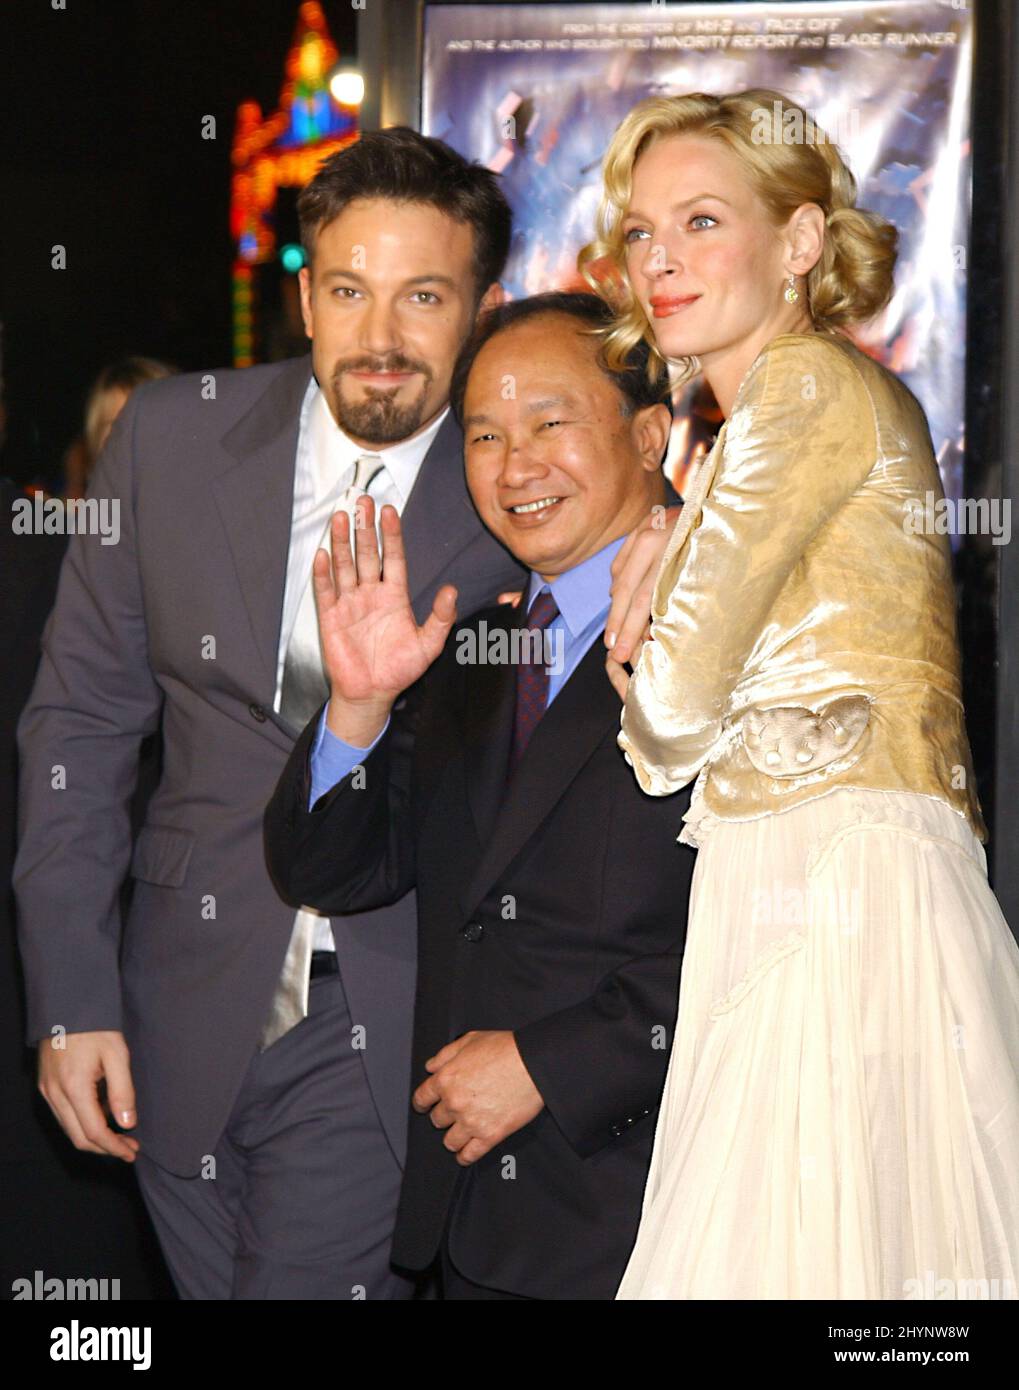 UMA THURMAN, BEN AFFLECK & JOHN WOO ATTEND THE 'PAYCHECK' PREMIERE AT GRAUMANN'S CHINESE THEATRE IN HOLLYWOOD. PICTURE: UK PRESS Stock Photo